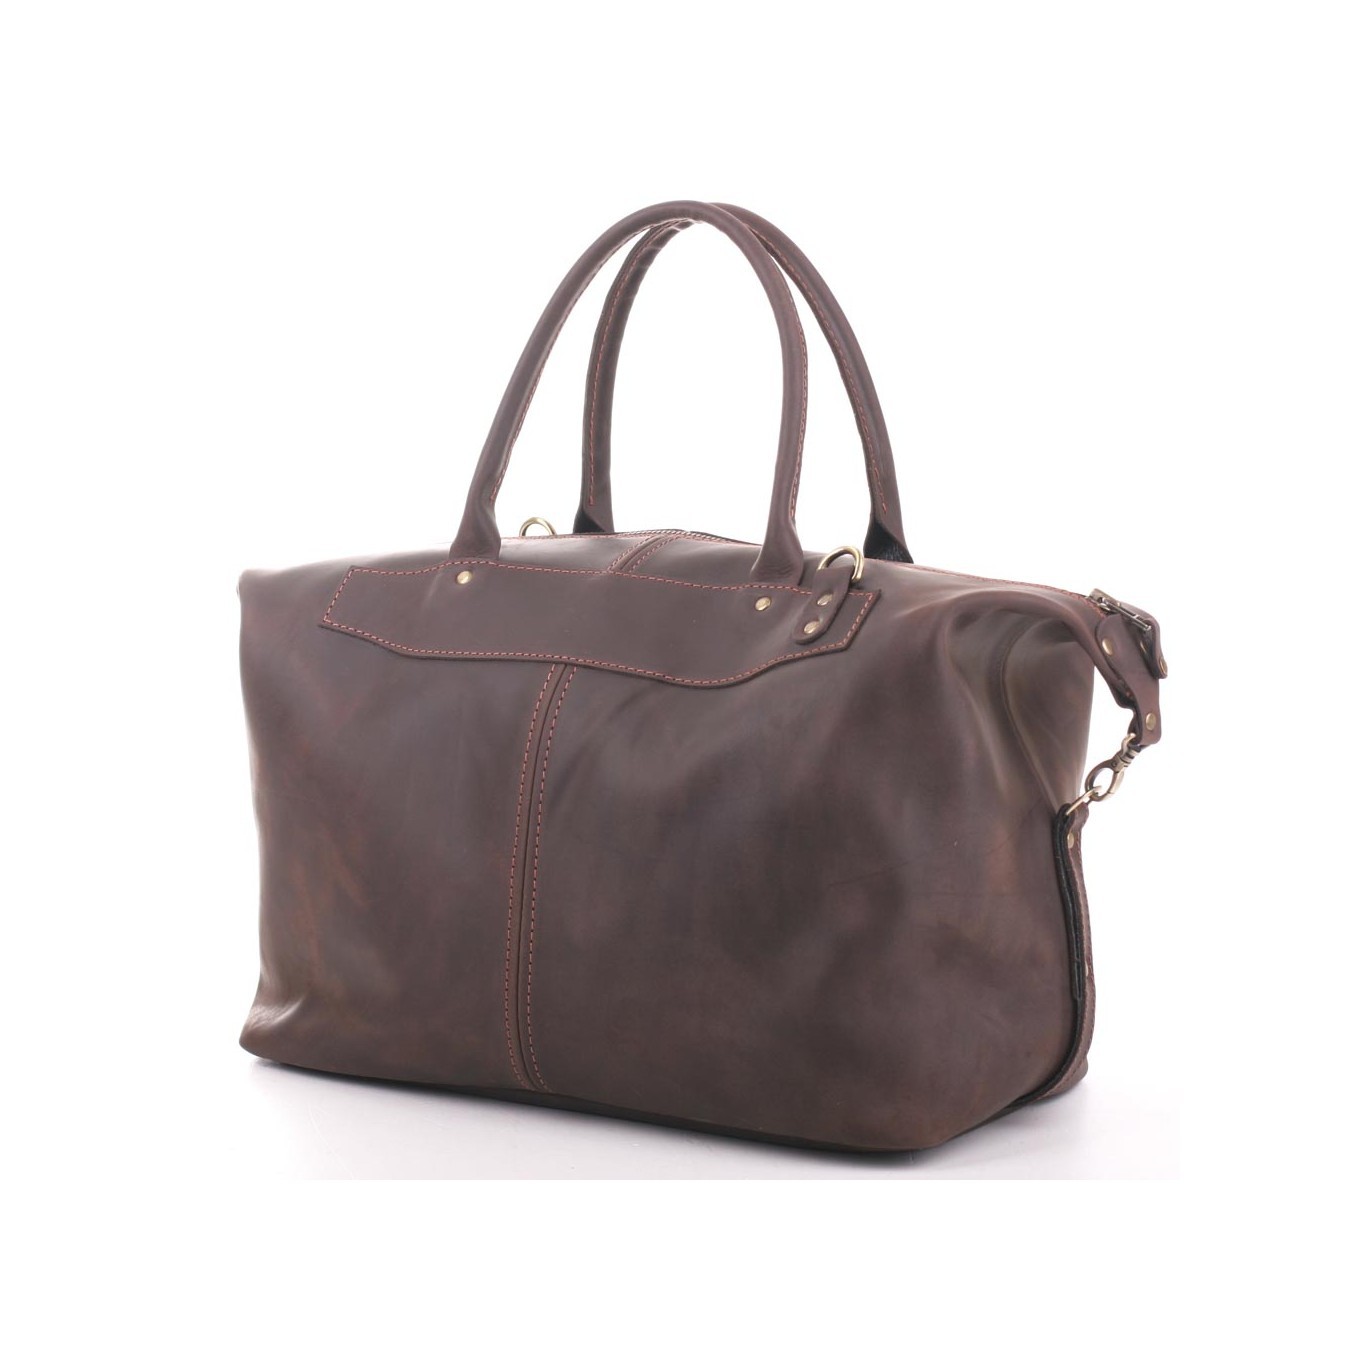 A high-quality brown satchel bag for travel